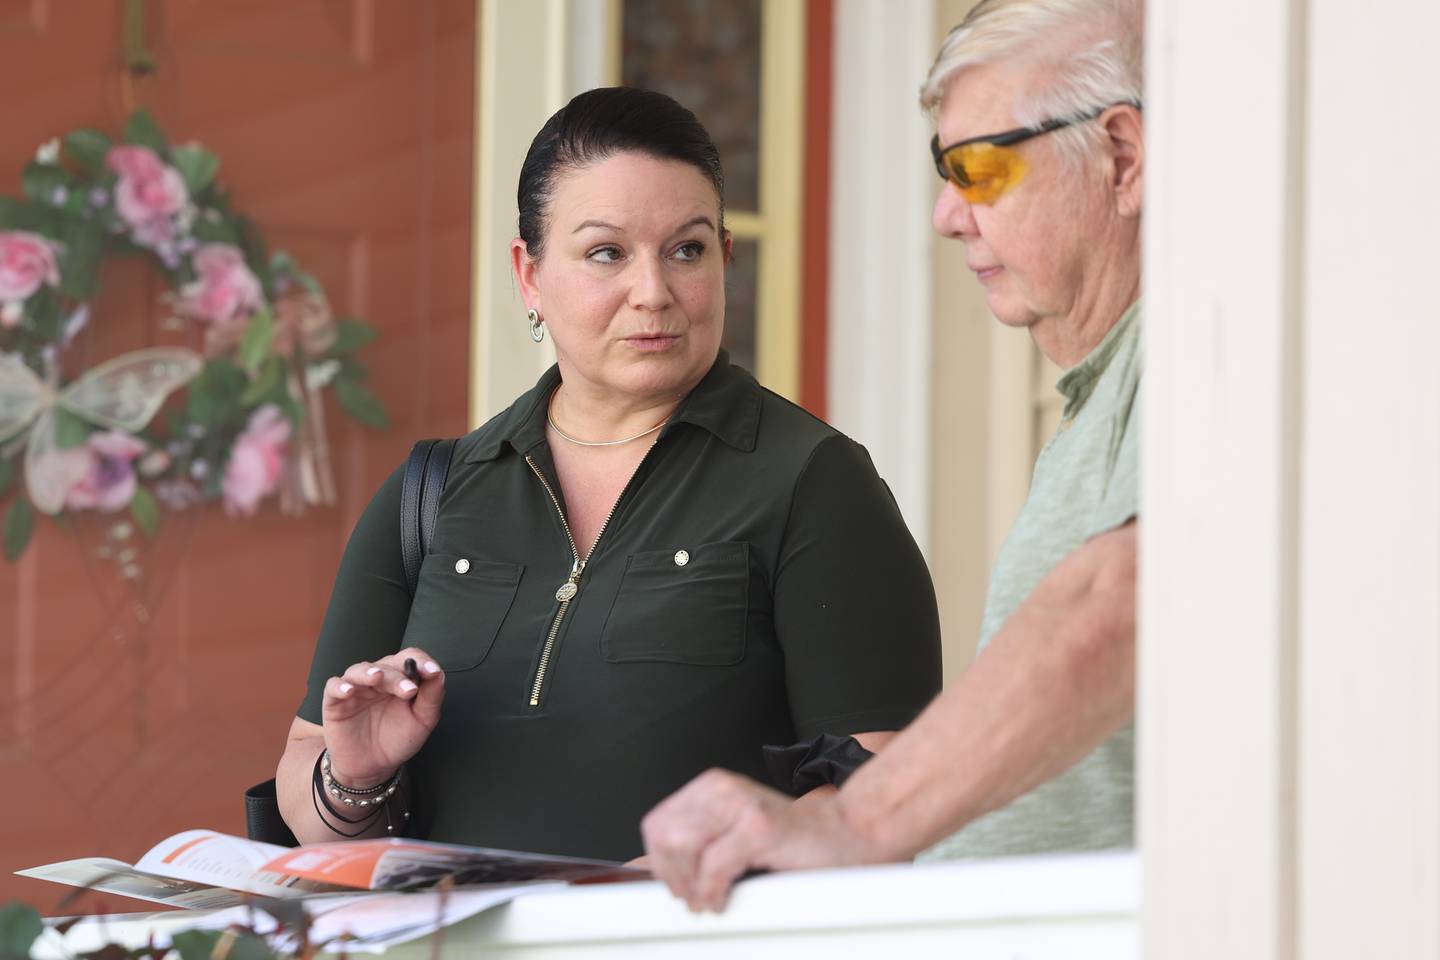 Maria Cedano, a realtor with ReMax, goes over paperwork with her client Wayne Galasinski. Wayne is looking to downsize and sell his home he has had since 2003. Wednesday, Aug. 10, 2022, in Crest Hill.